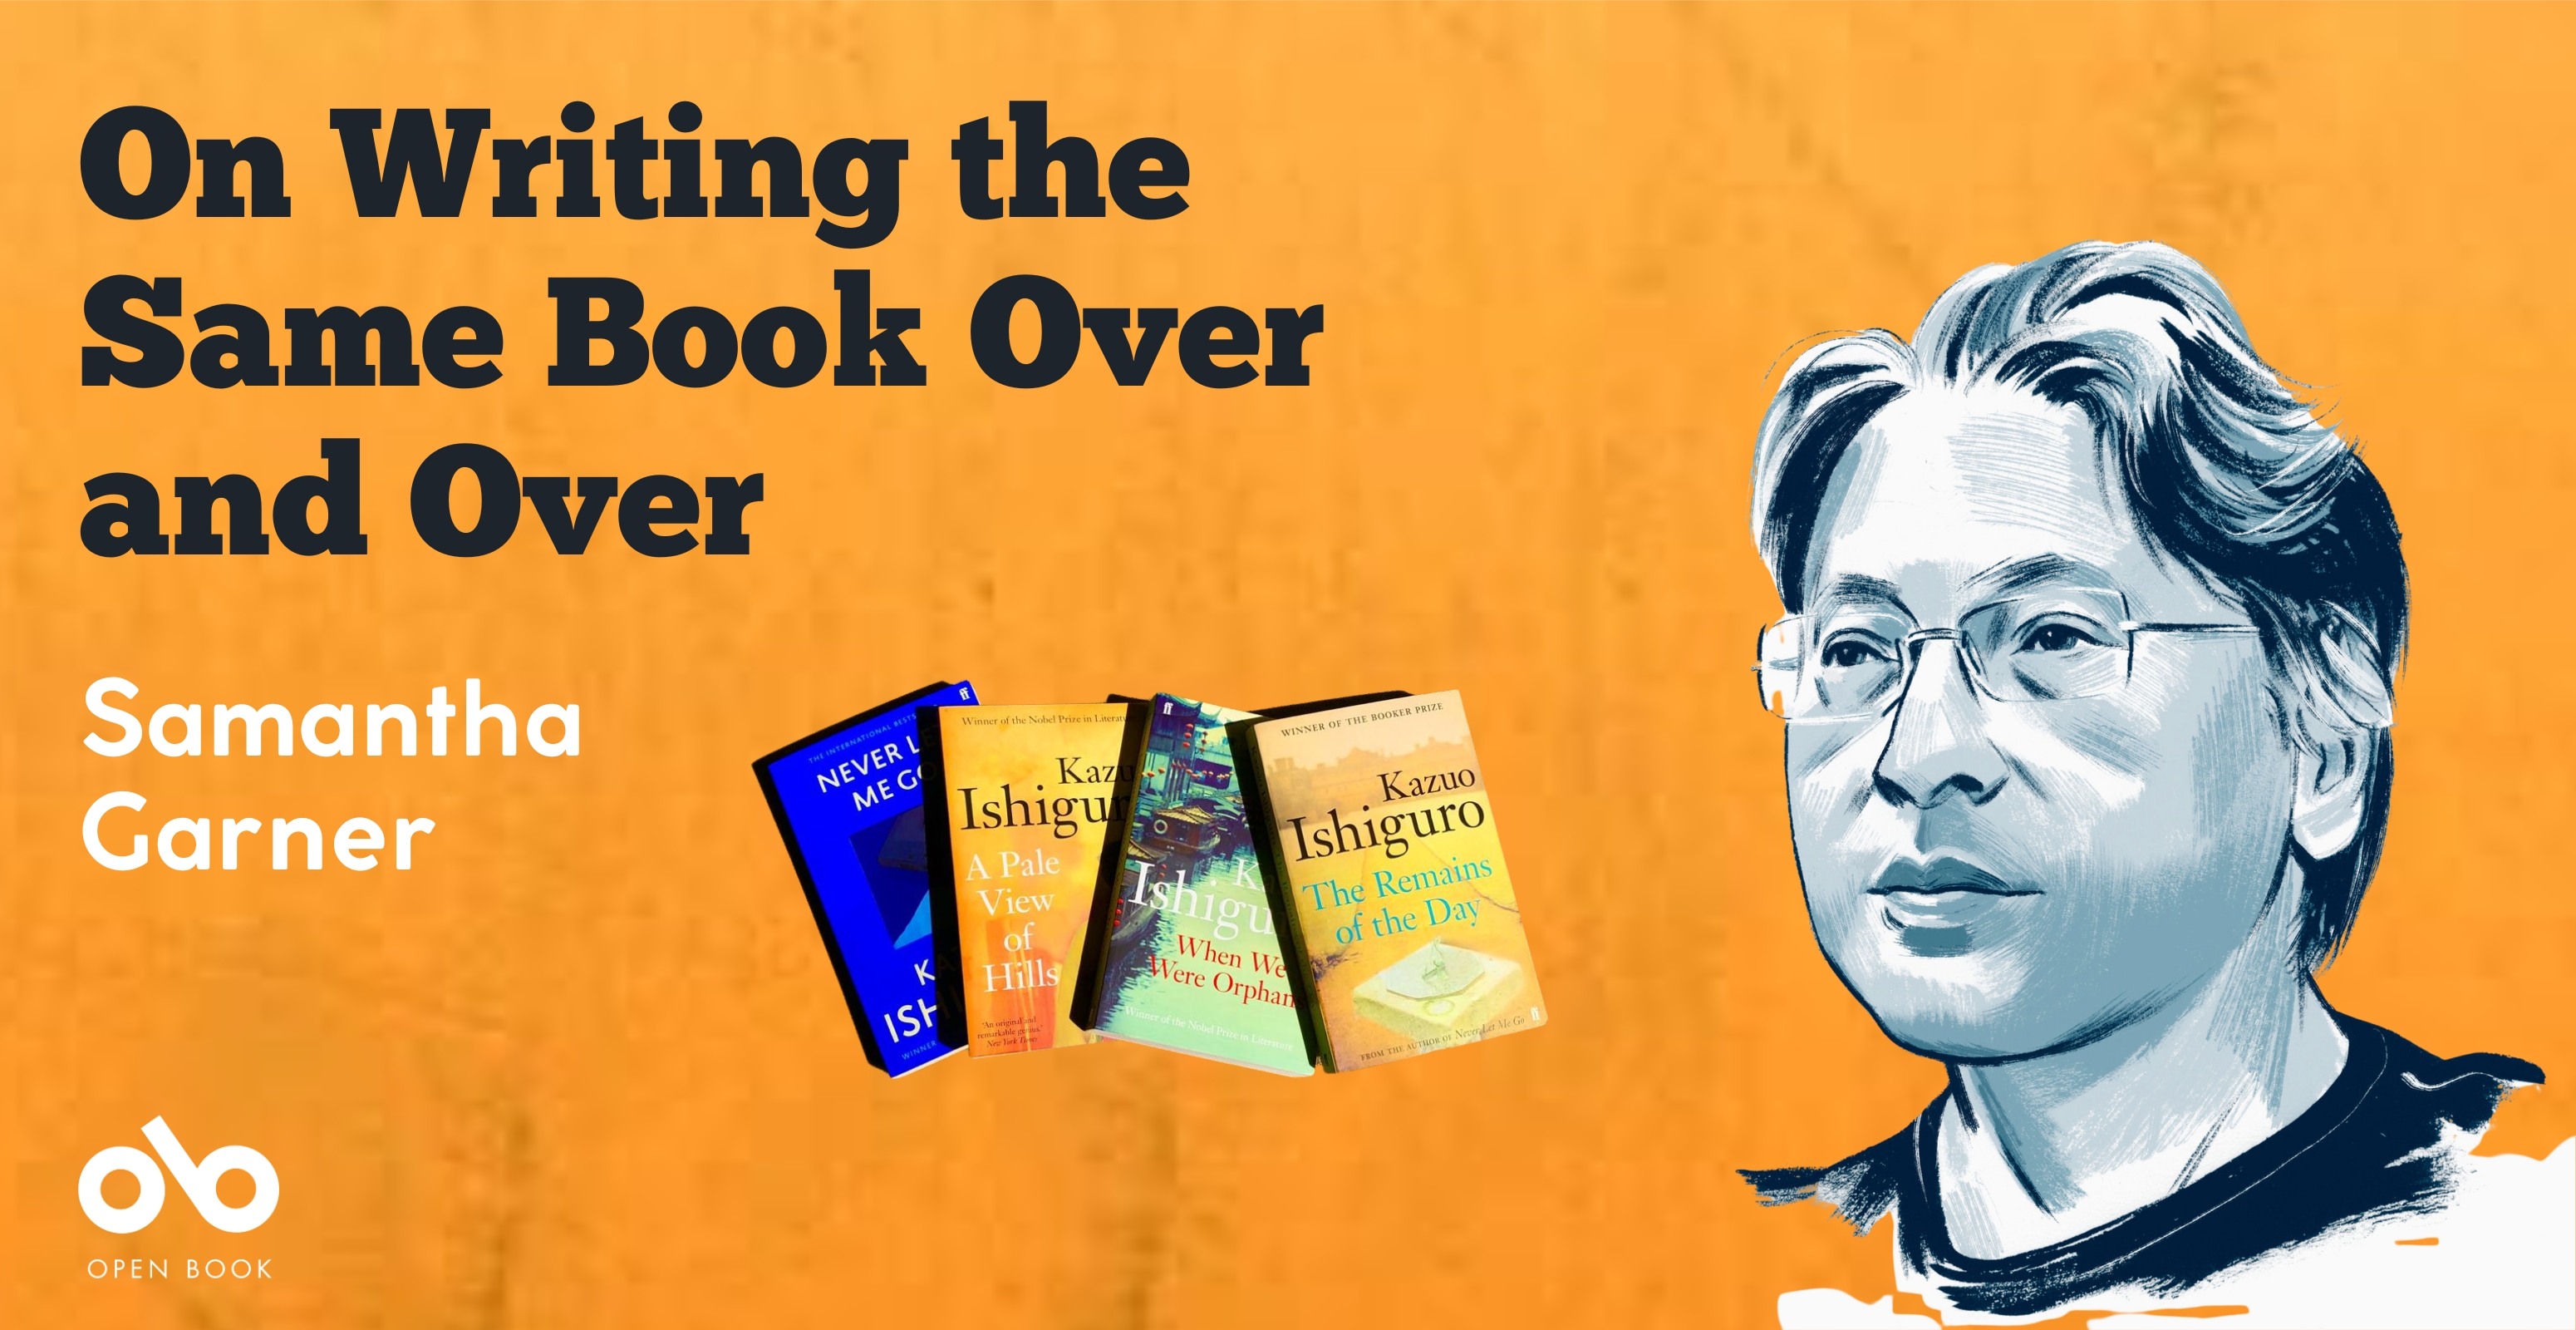 On Writing the Same Book Over and Over - By Samantha Garner. Text over worn parchment background, with Open Book logo and bottom left corner below text, and image of a number of Kazuo Ishiguro's novels in a row, with an illustrated portrait of the author on the right hand side of the banner.